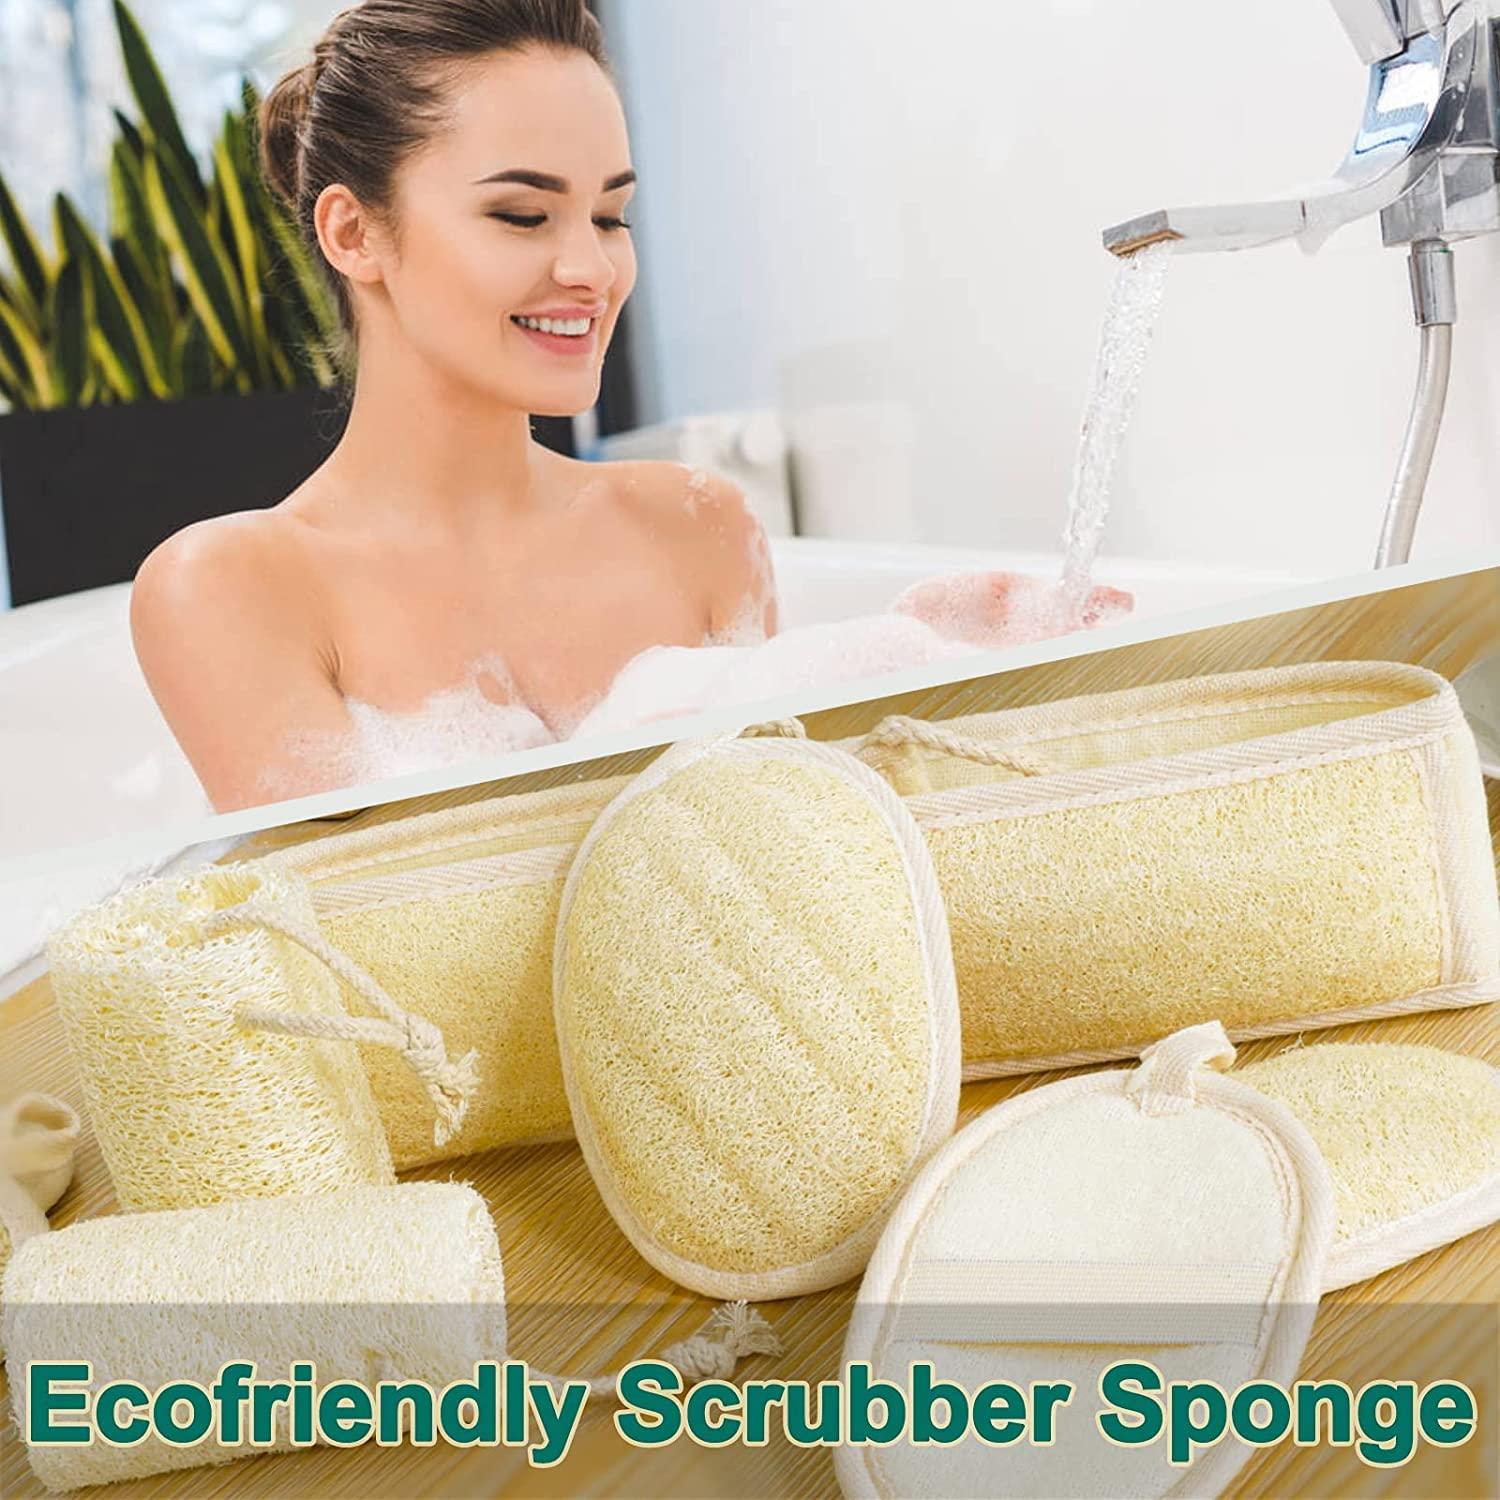 6 Pcs Organic Natural Loofah Sponge, Unbleached Luffa Eco-Friendly Shower  Exfoliating Scrubber for Adults Body Deep Clean and Skin Care In Spa Bath 